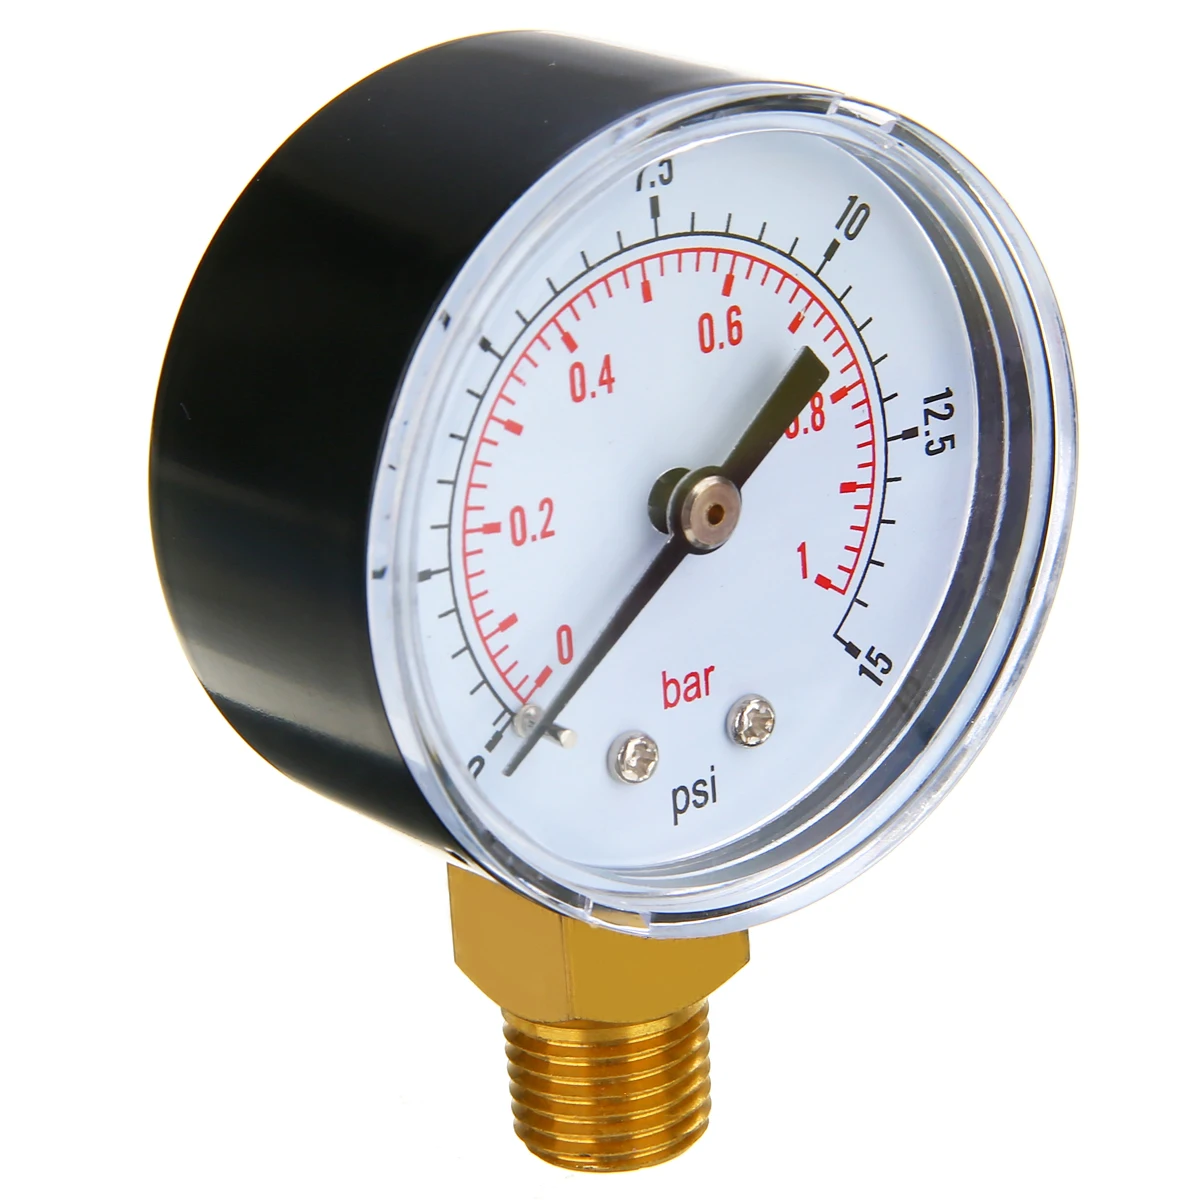 Accu-Gage RA15X Professional Tire Low Pressure Gauge 0-15 PSI Right Angle Chuck 